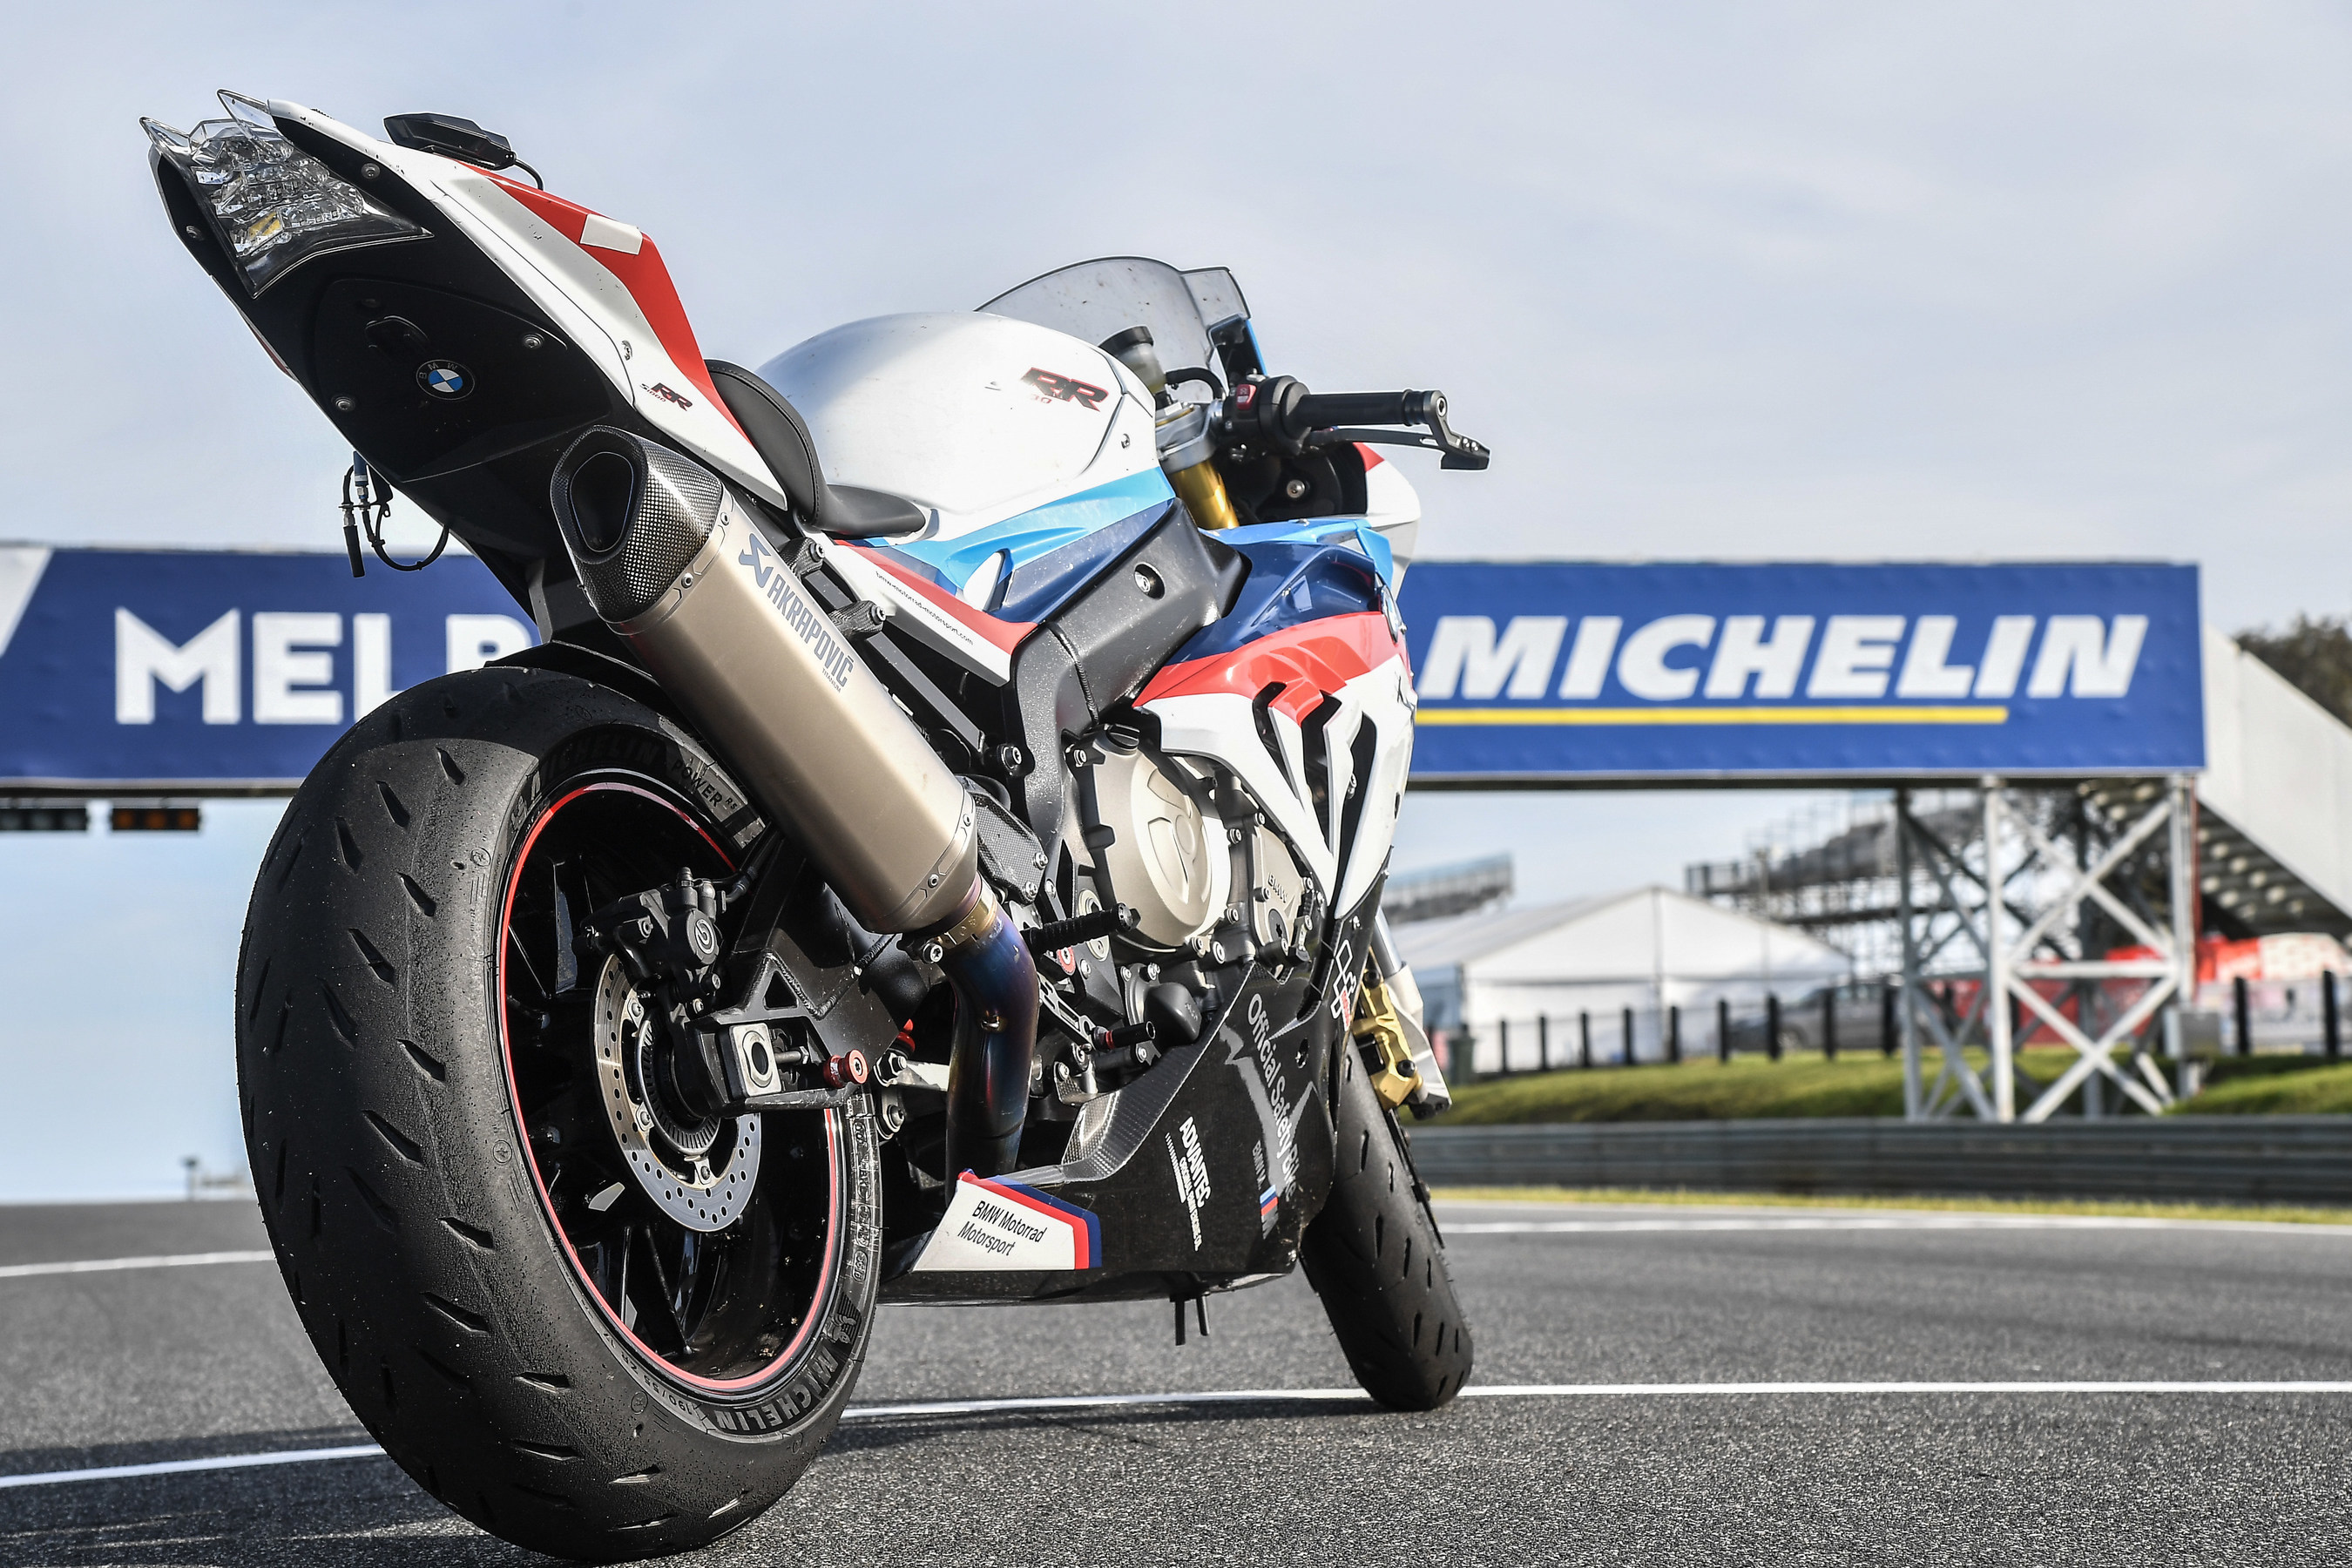 Michelin introduces next generation motorcycle road tire